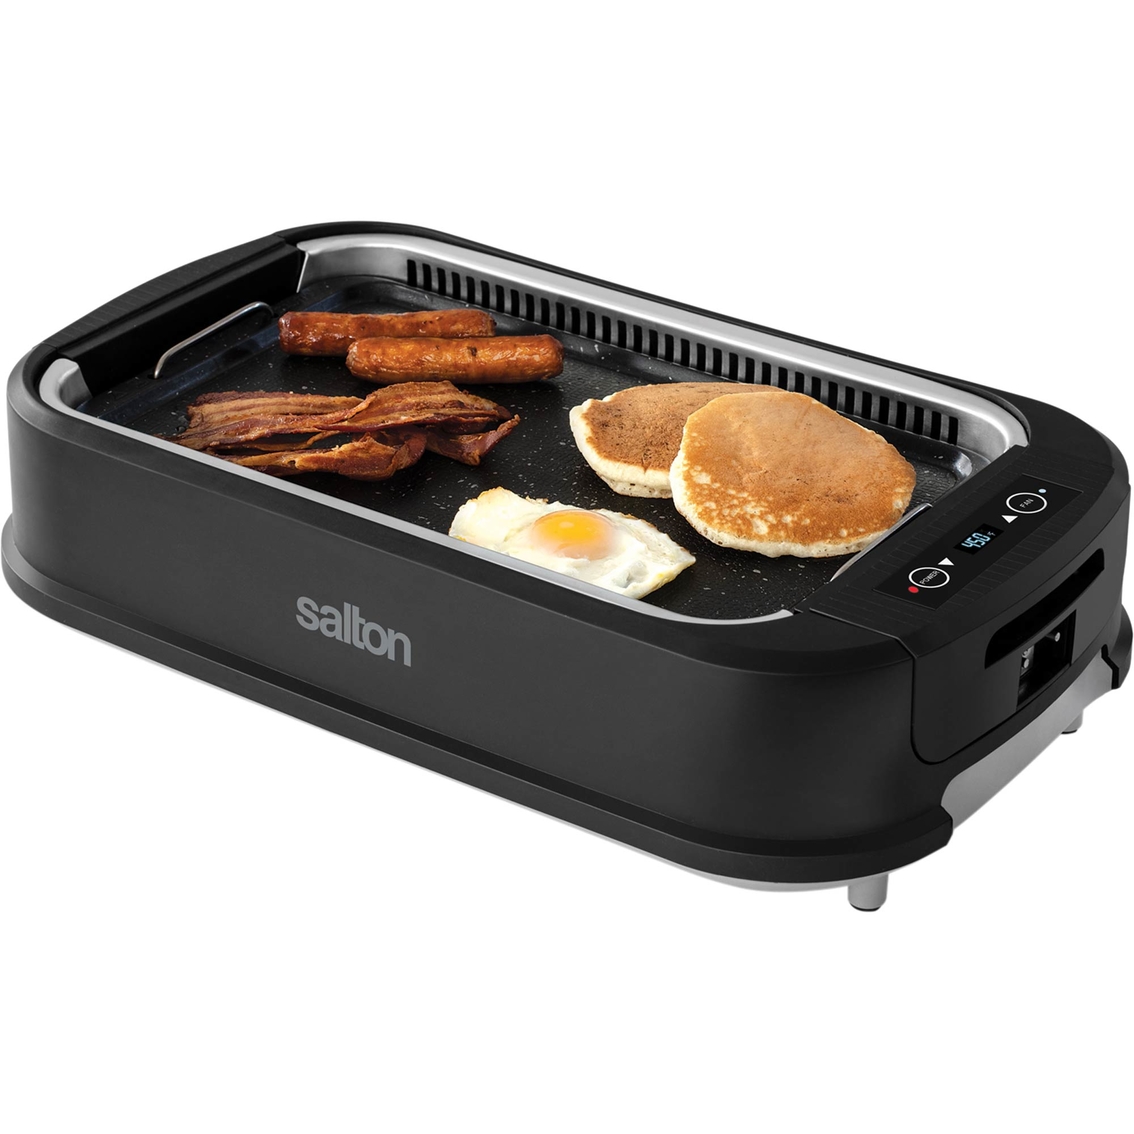 Salton Smokeless Indoor Bbq Grill / Griddle